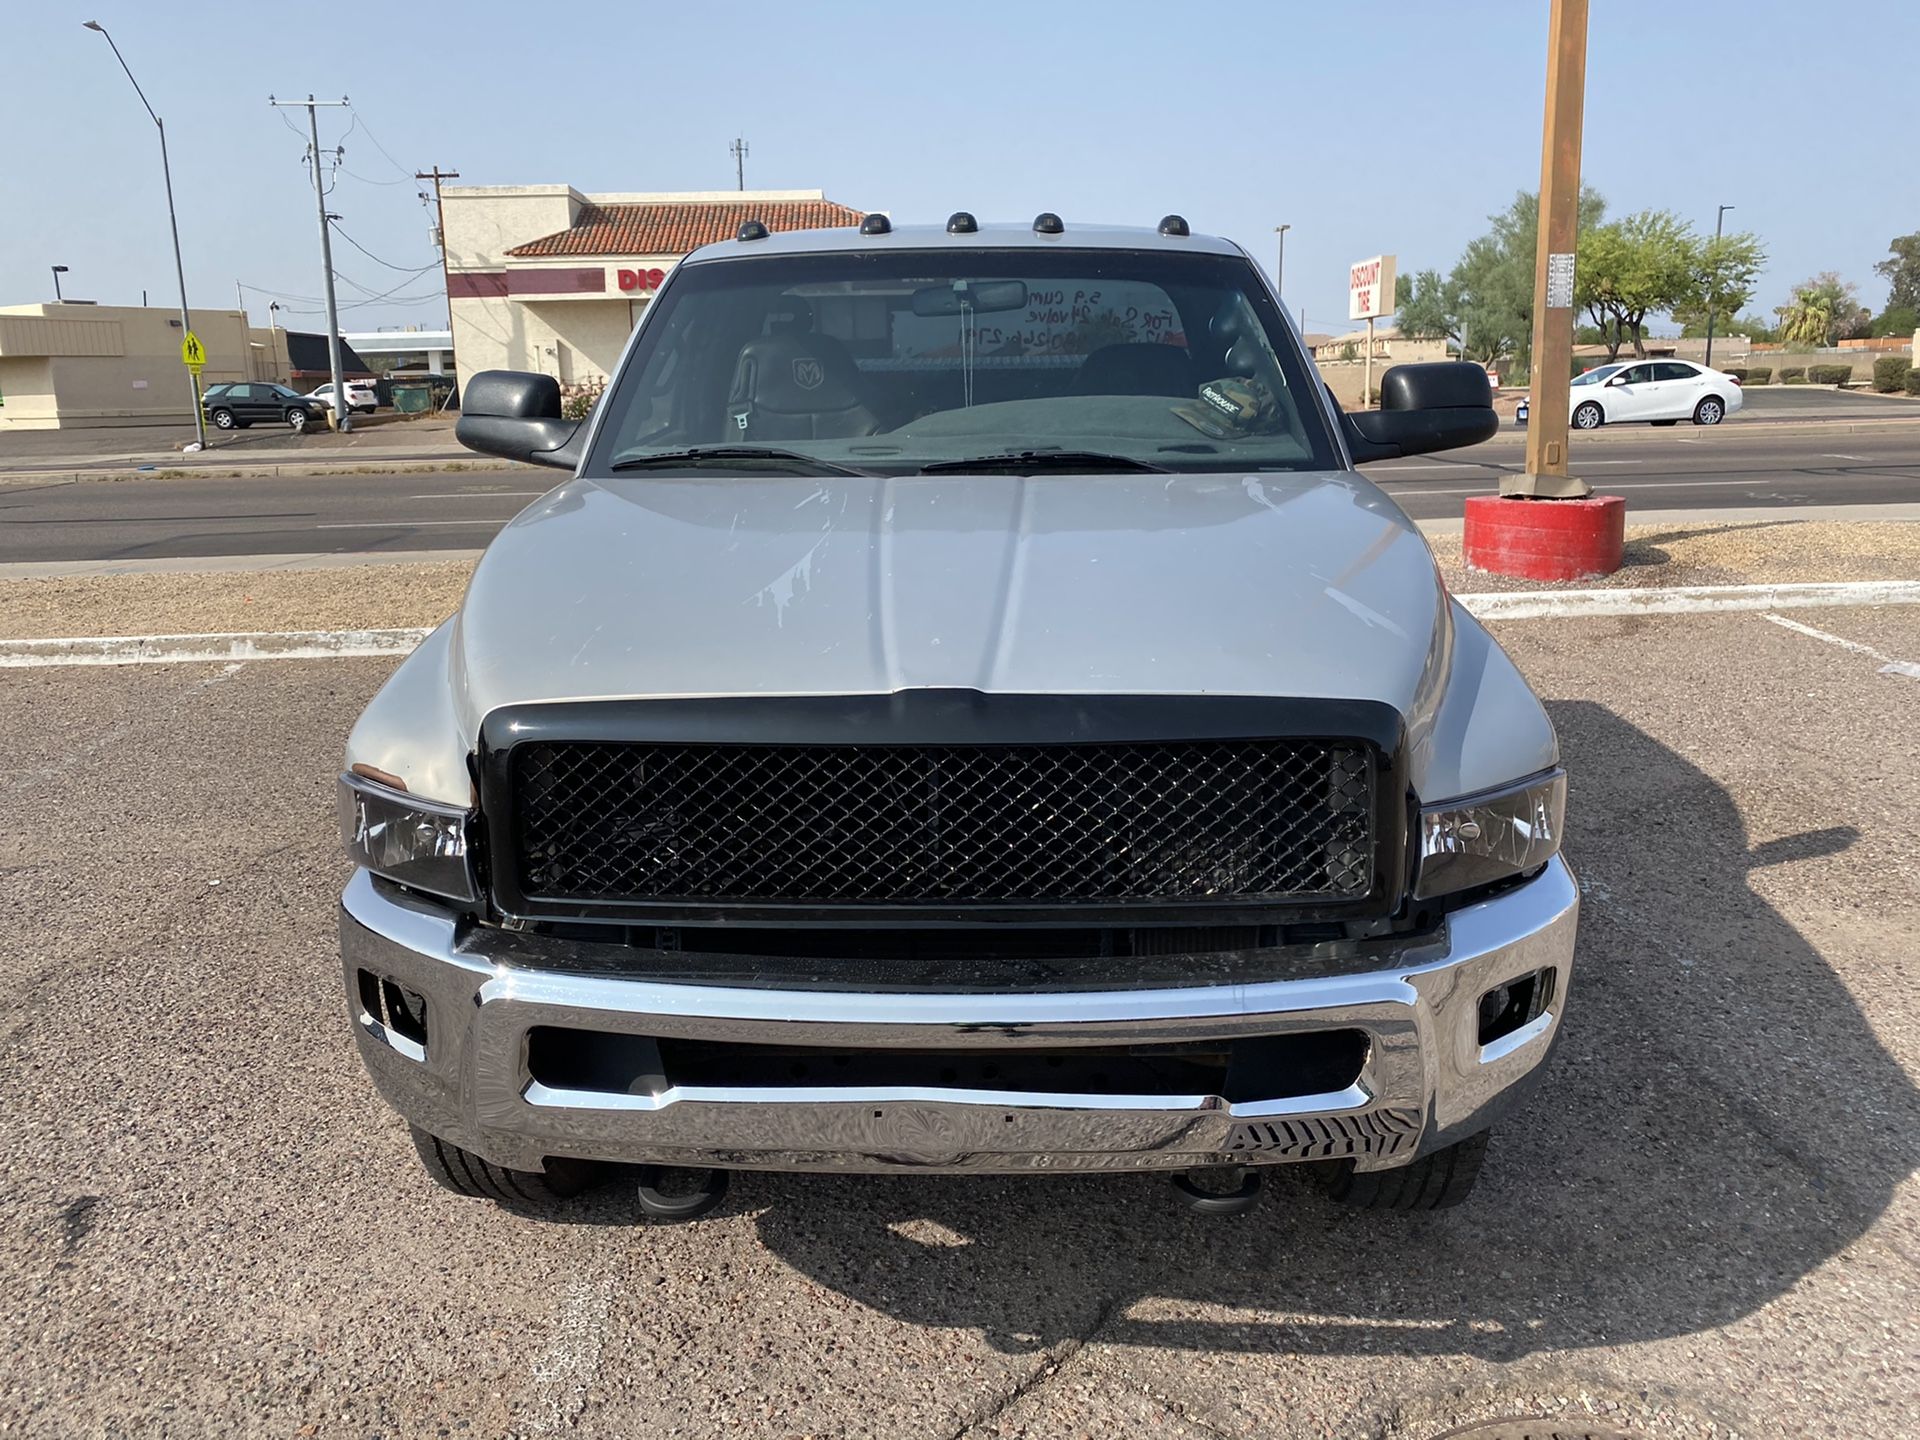 2000 Dodge Ram grill and lights